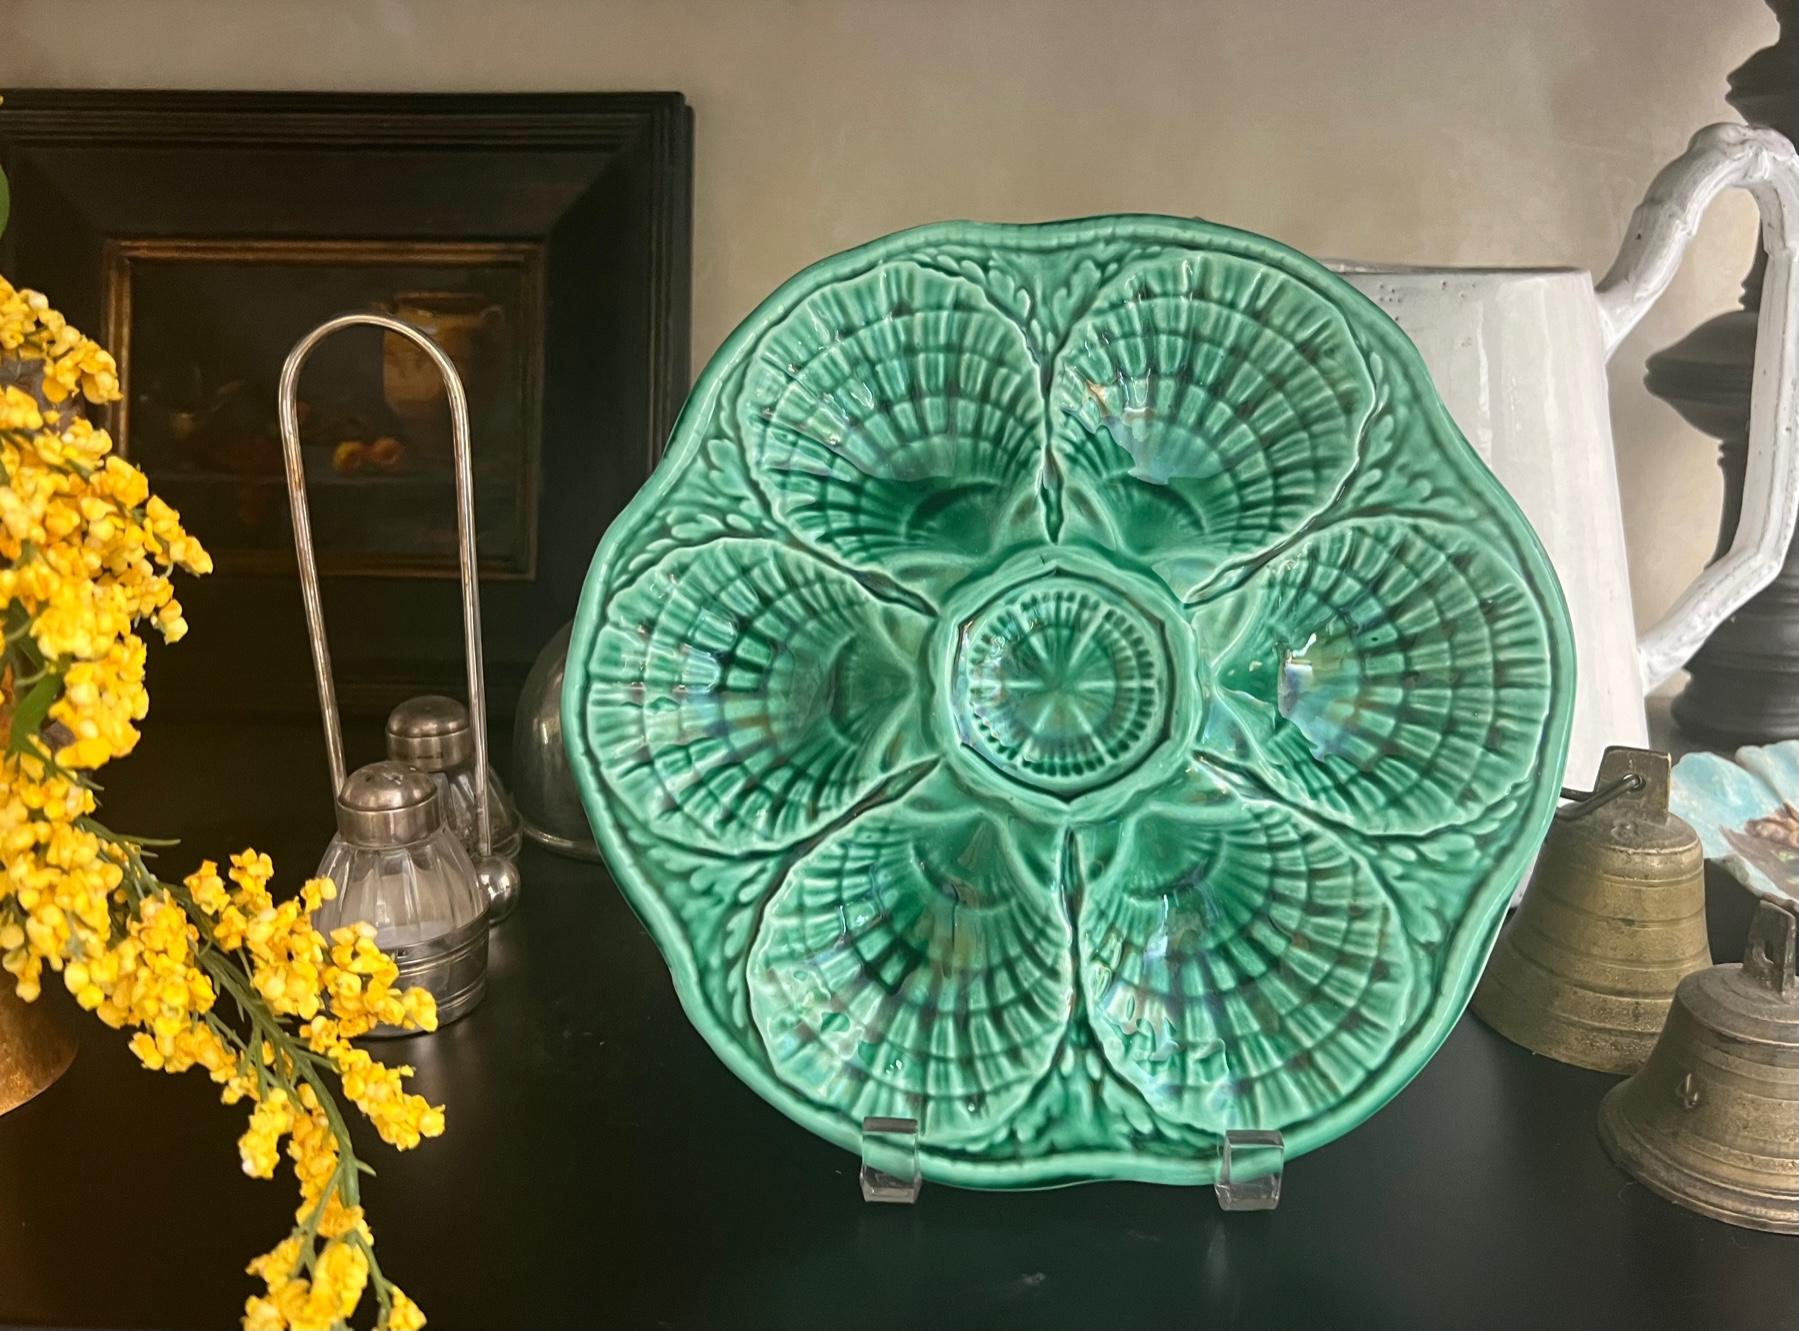 Vibrant green vintage Majolica six well oyster plates made in France by Sarreguemines between the 1930s and 1940s. Each is slightly different in color as they are hand painted, all are stamped Sarreguemines France.